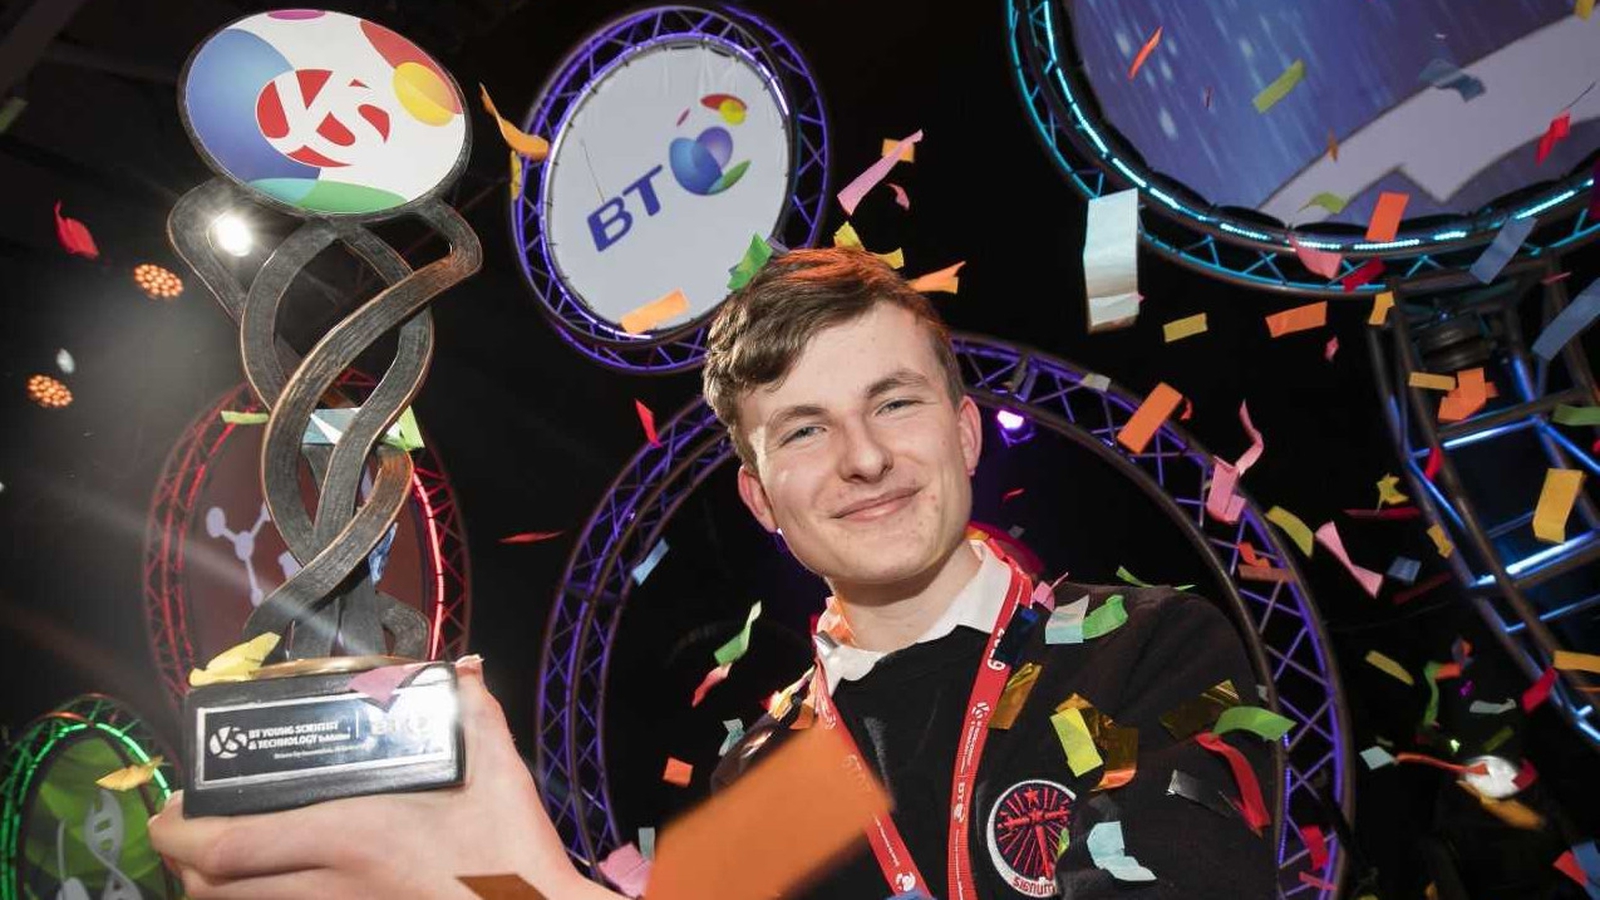 Dublin student wins young scientist award